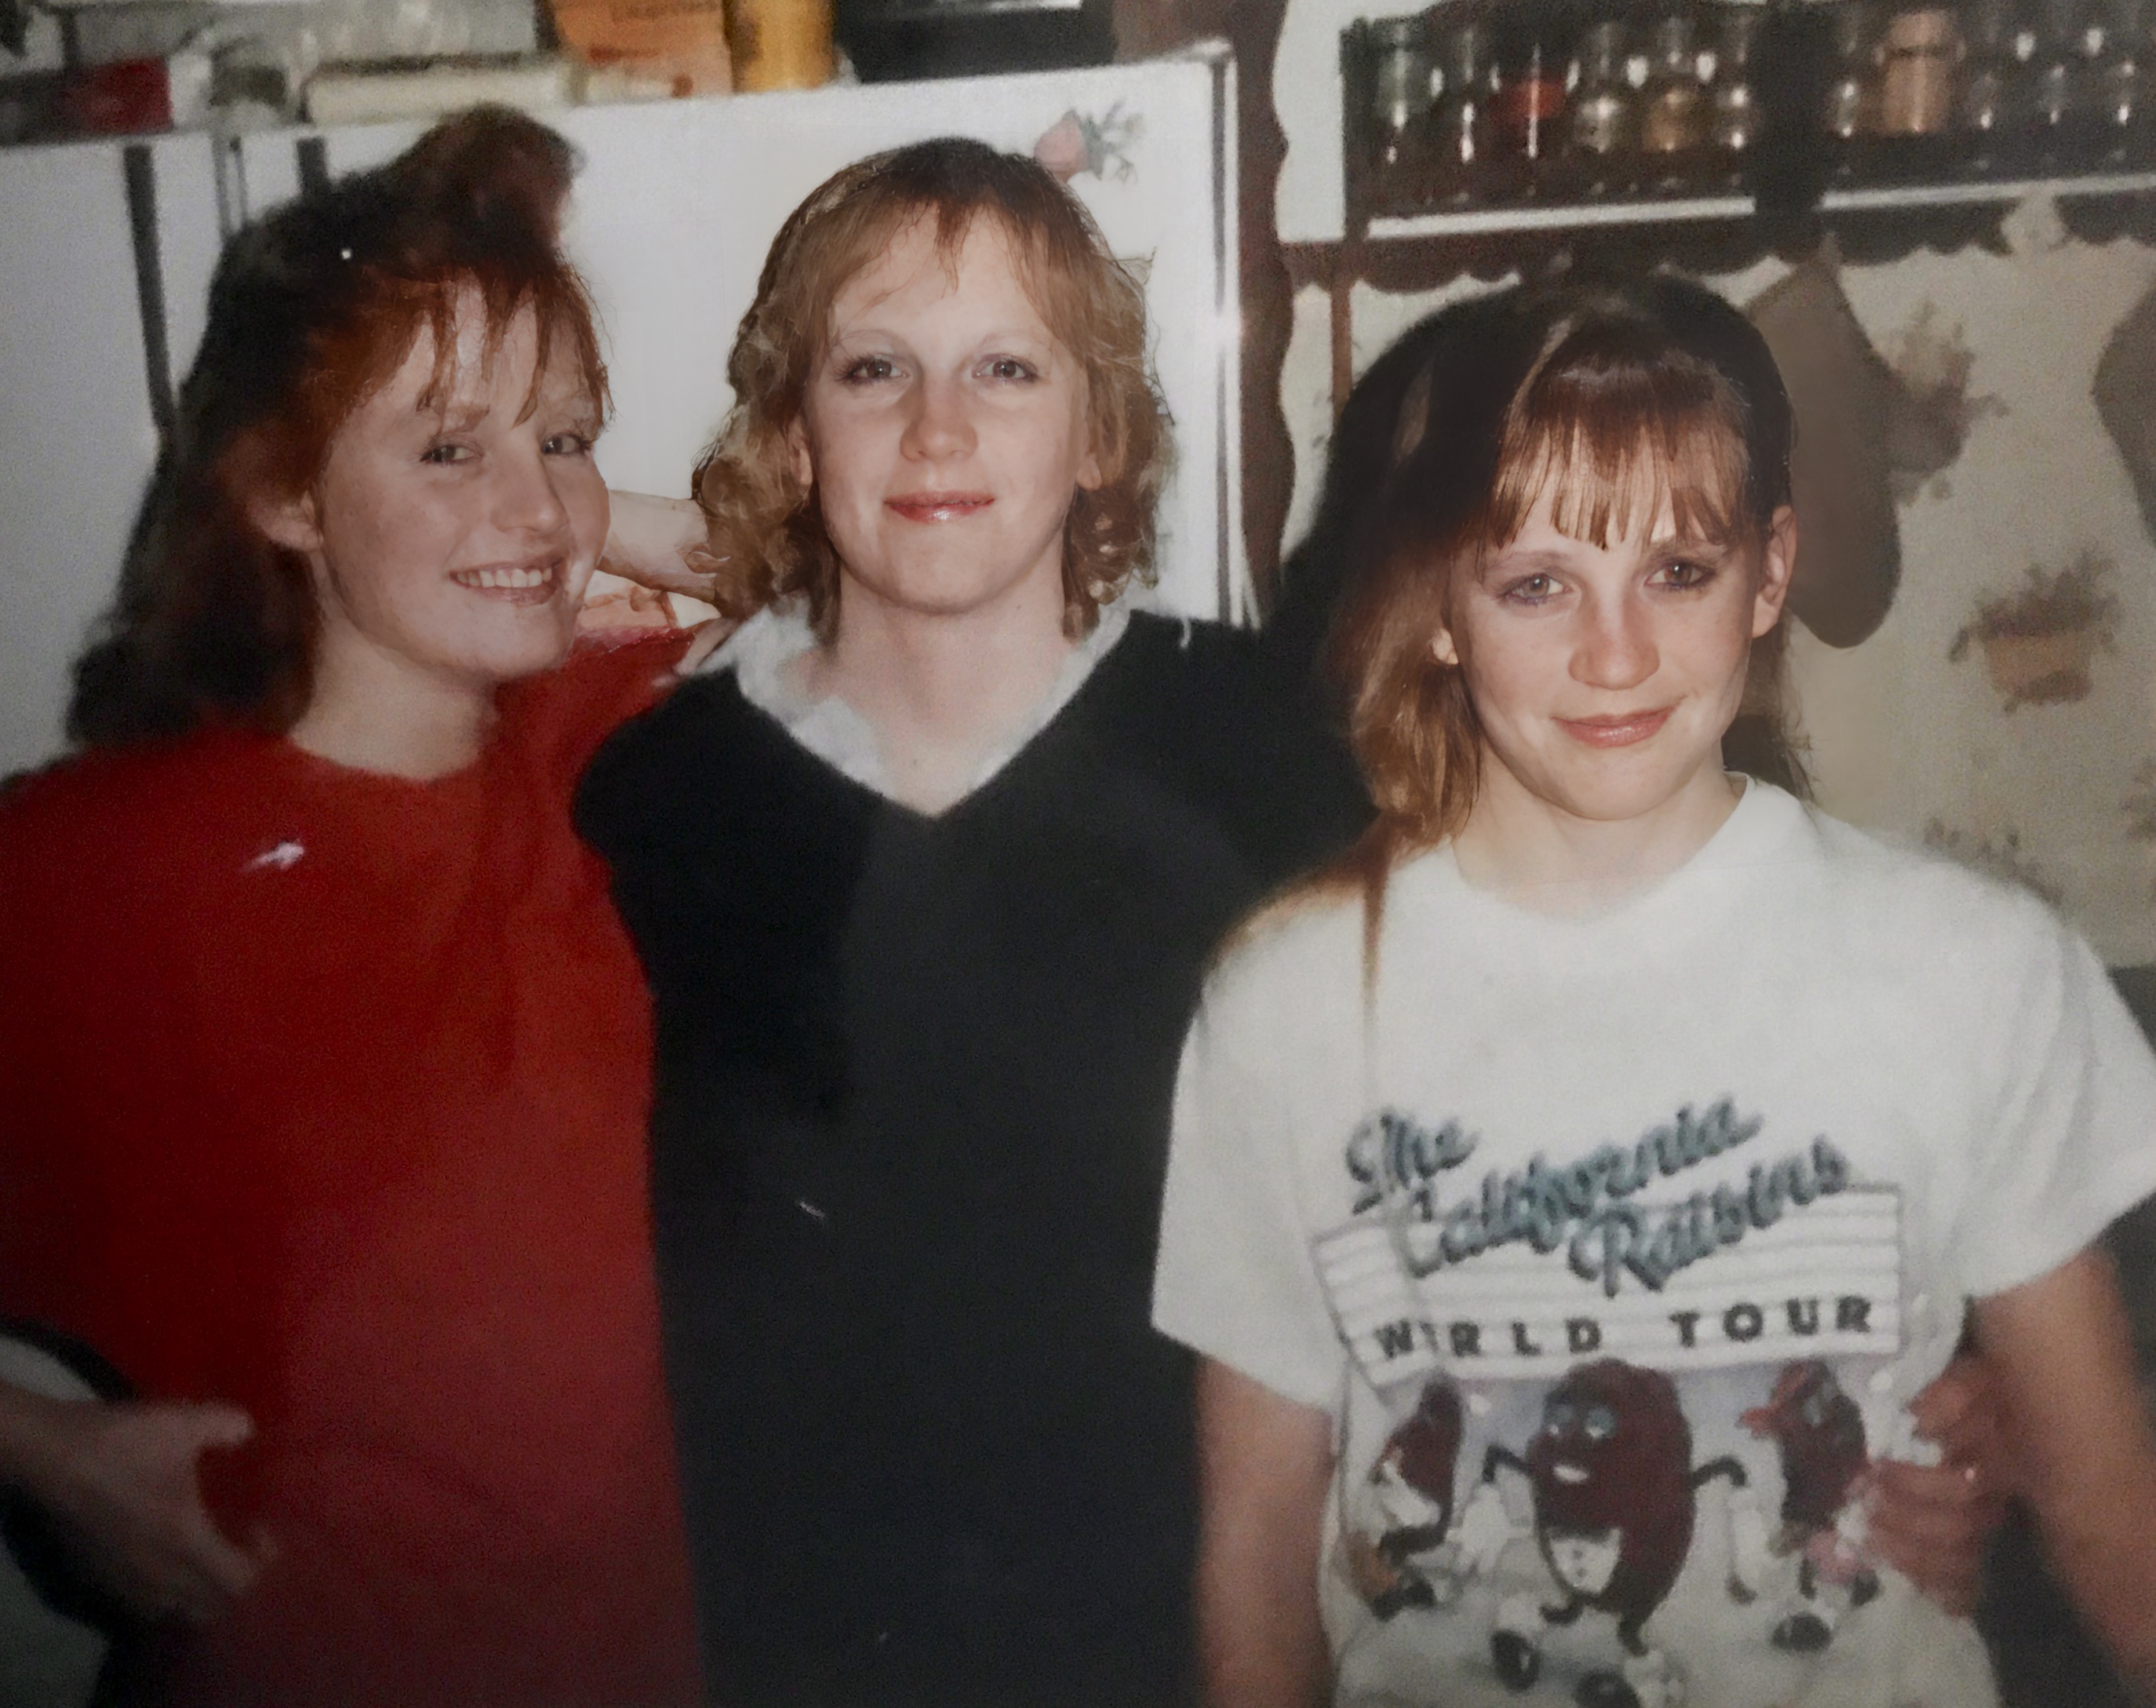 Carrie Lynn, Vickie, and Michelle 1989(?)